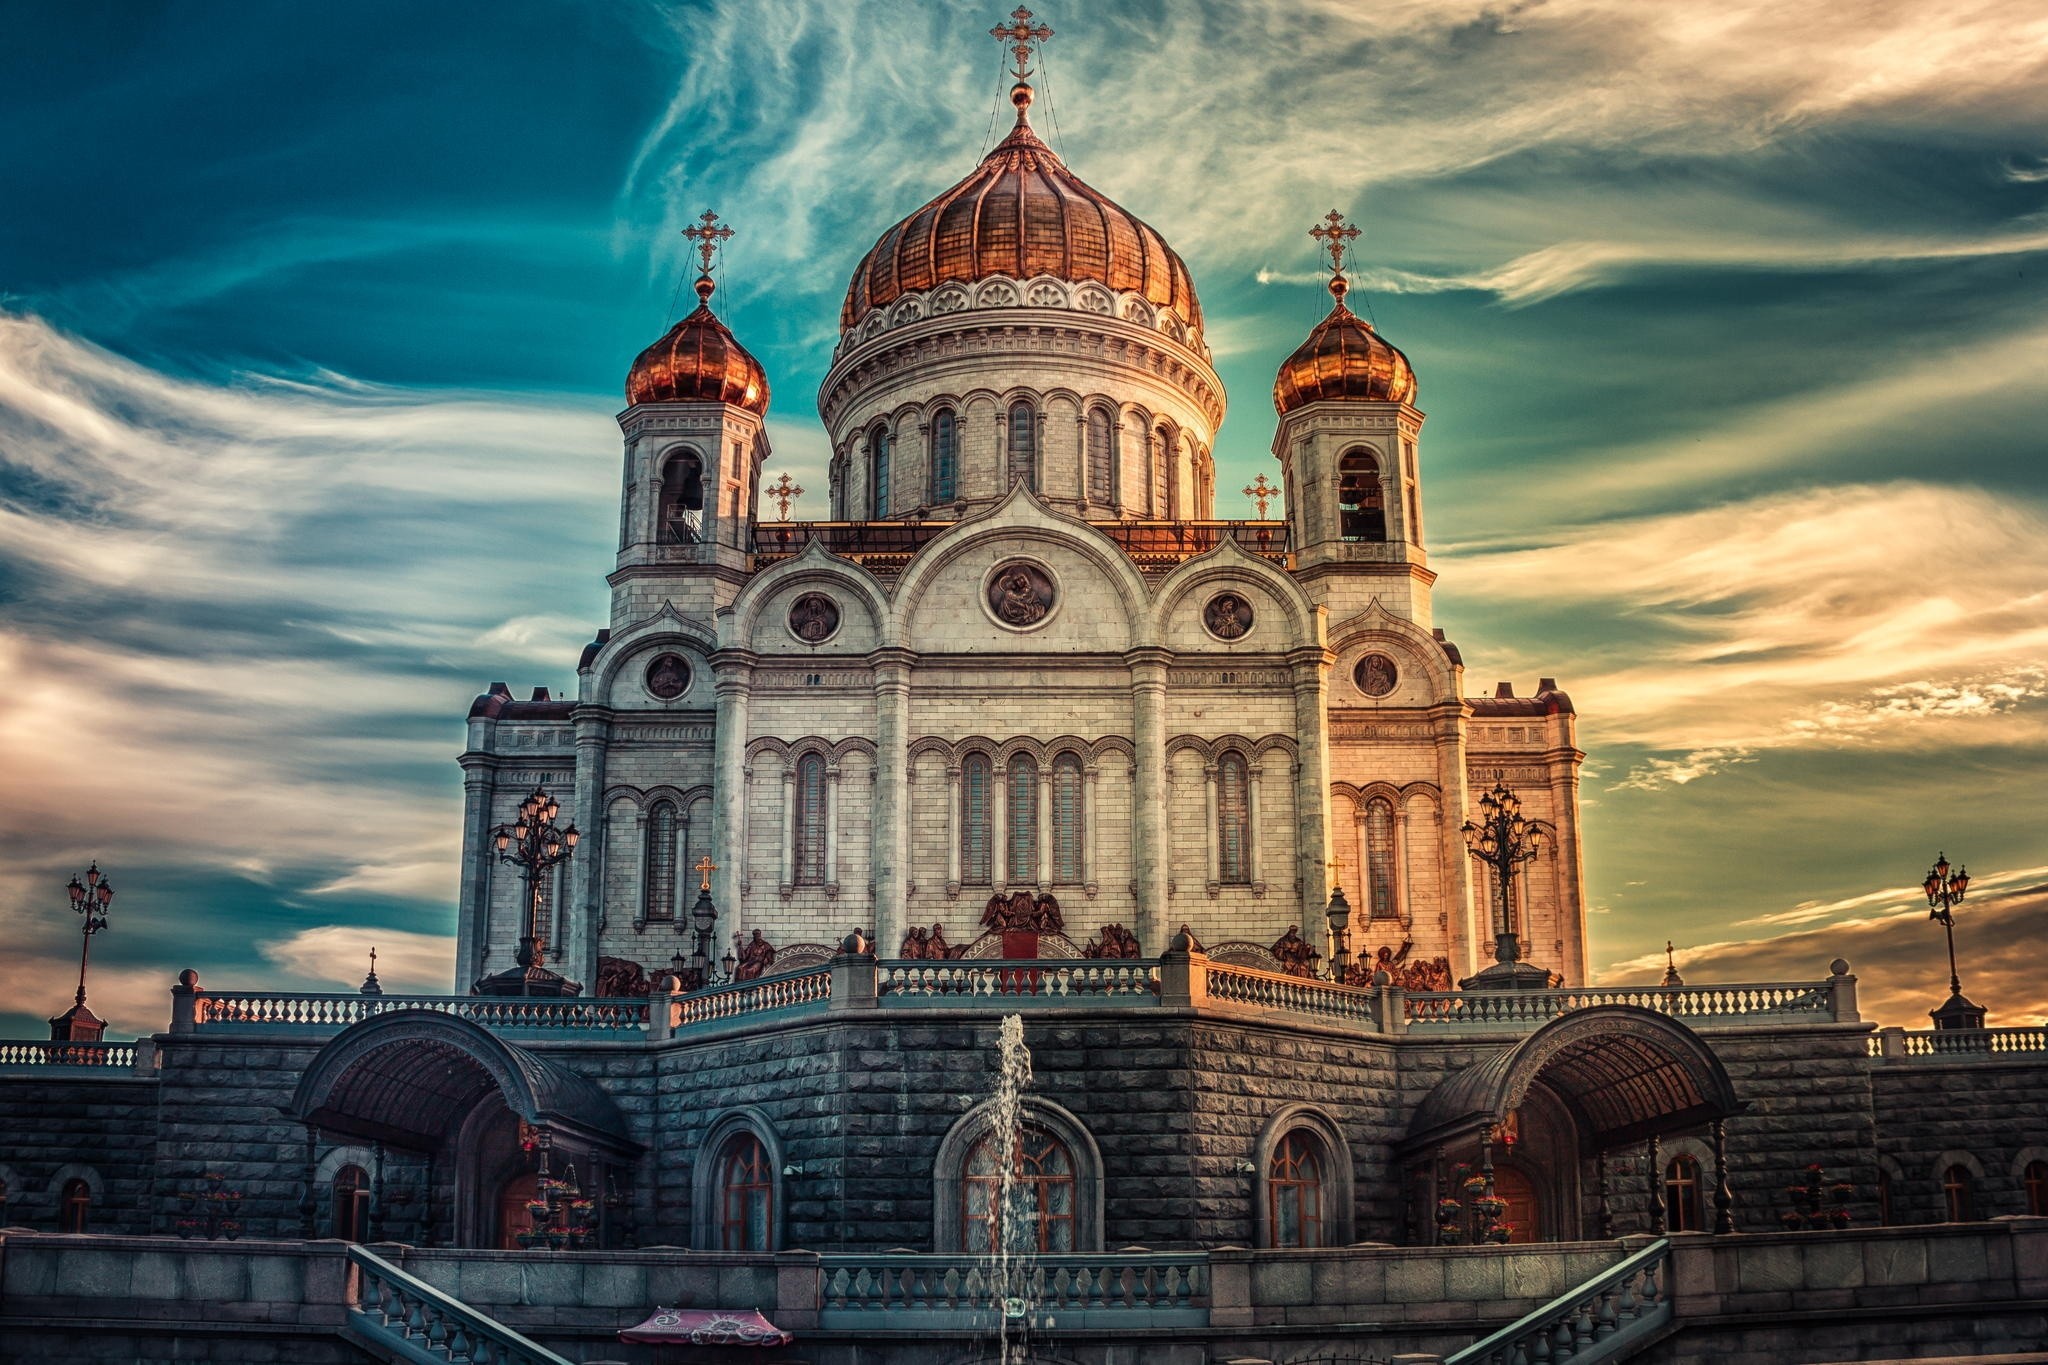 religious, cathedral of christ the saviour, architecture, cathedral, church, dome, russia, cathedrals